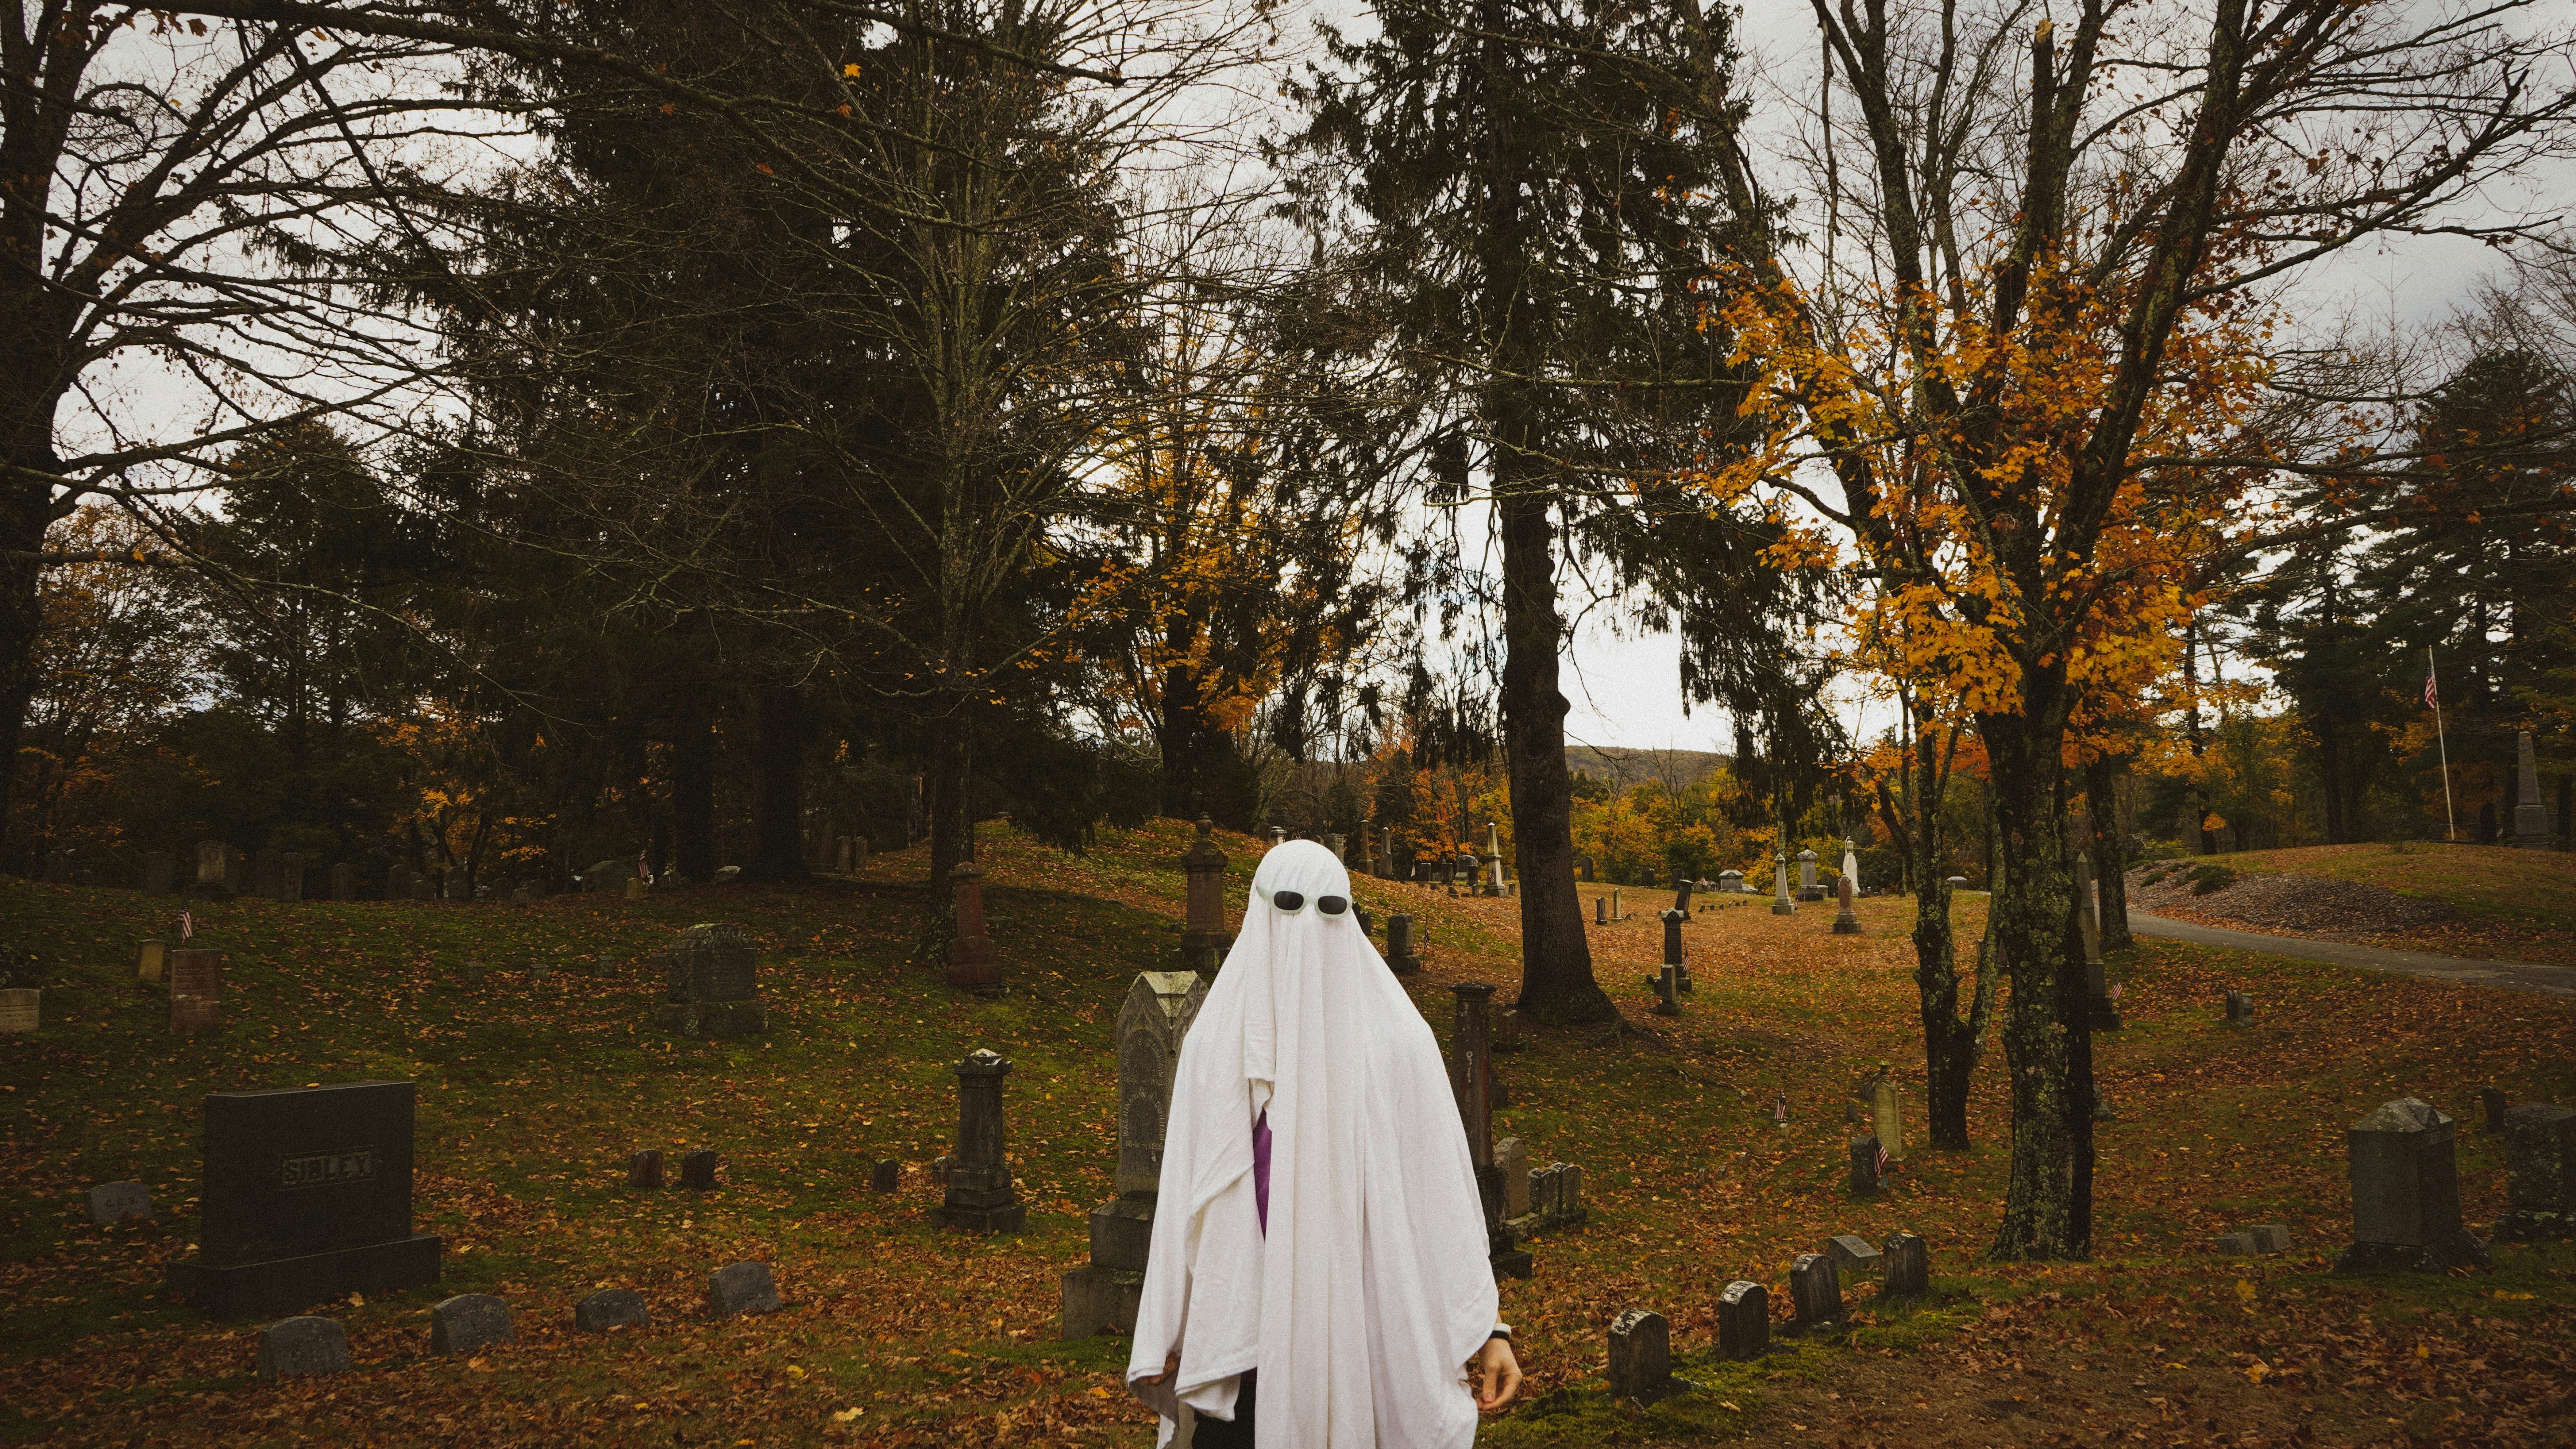 ghost in sunglasses visiting graveyard on halloween, oct 2021